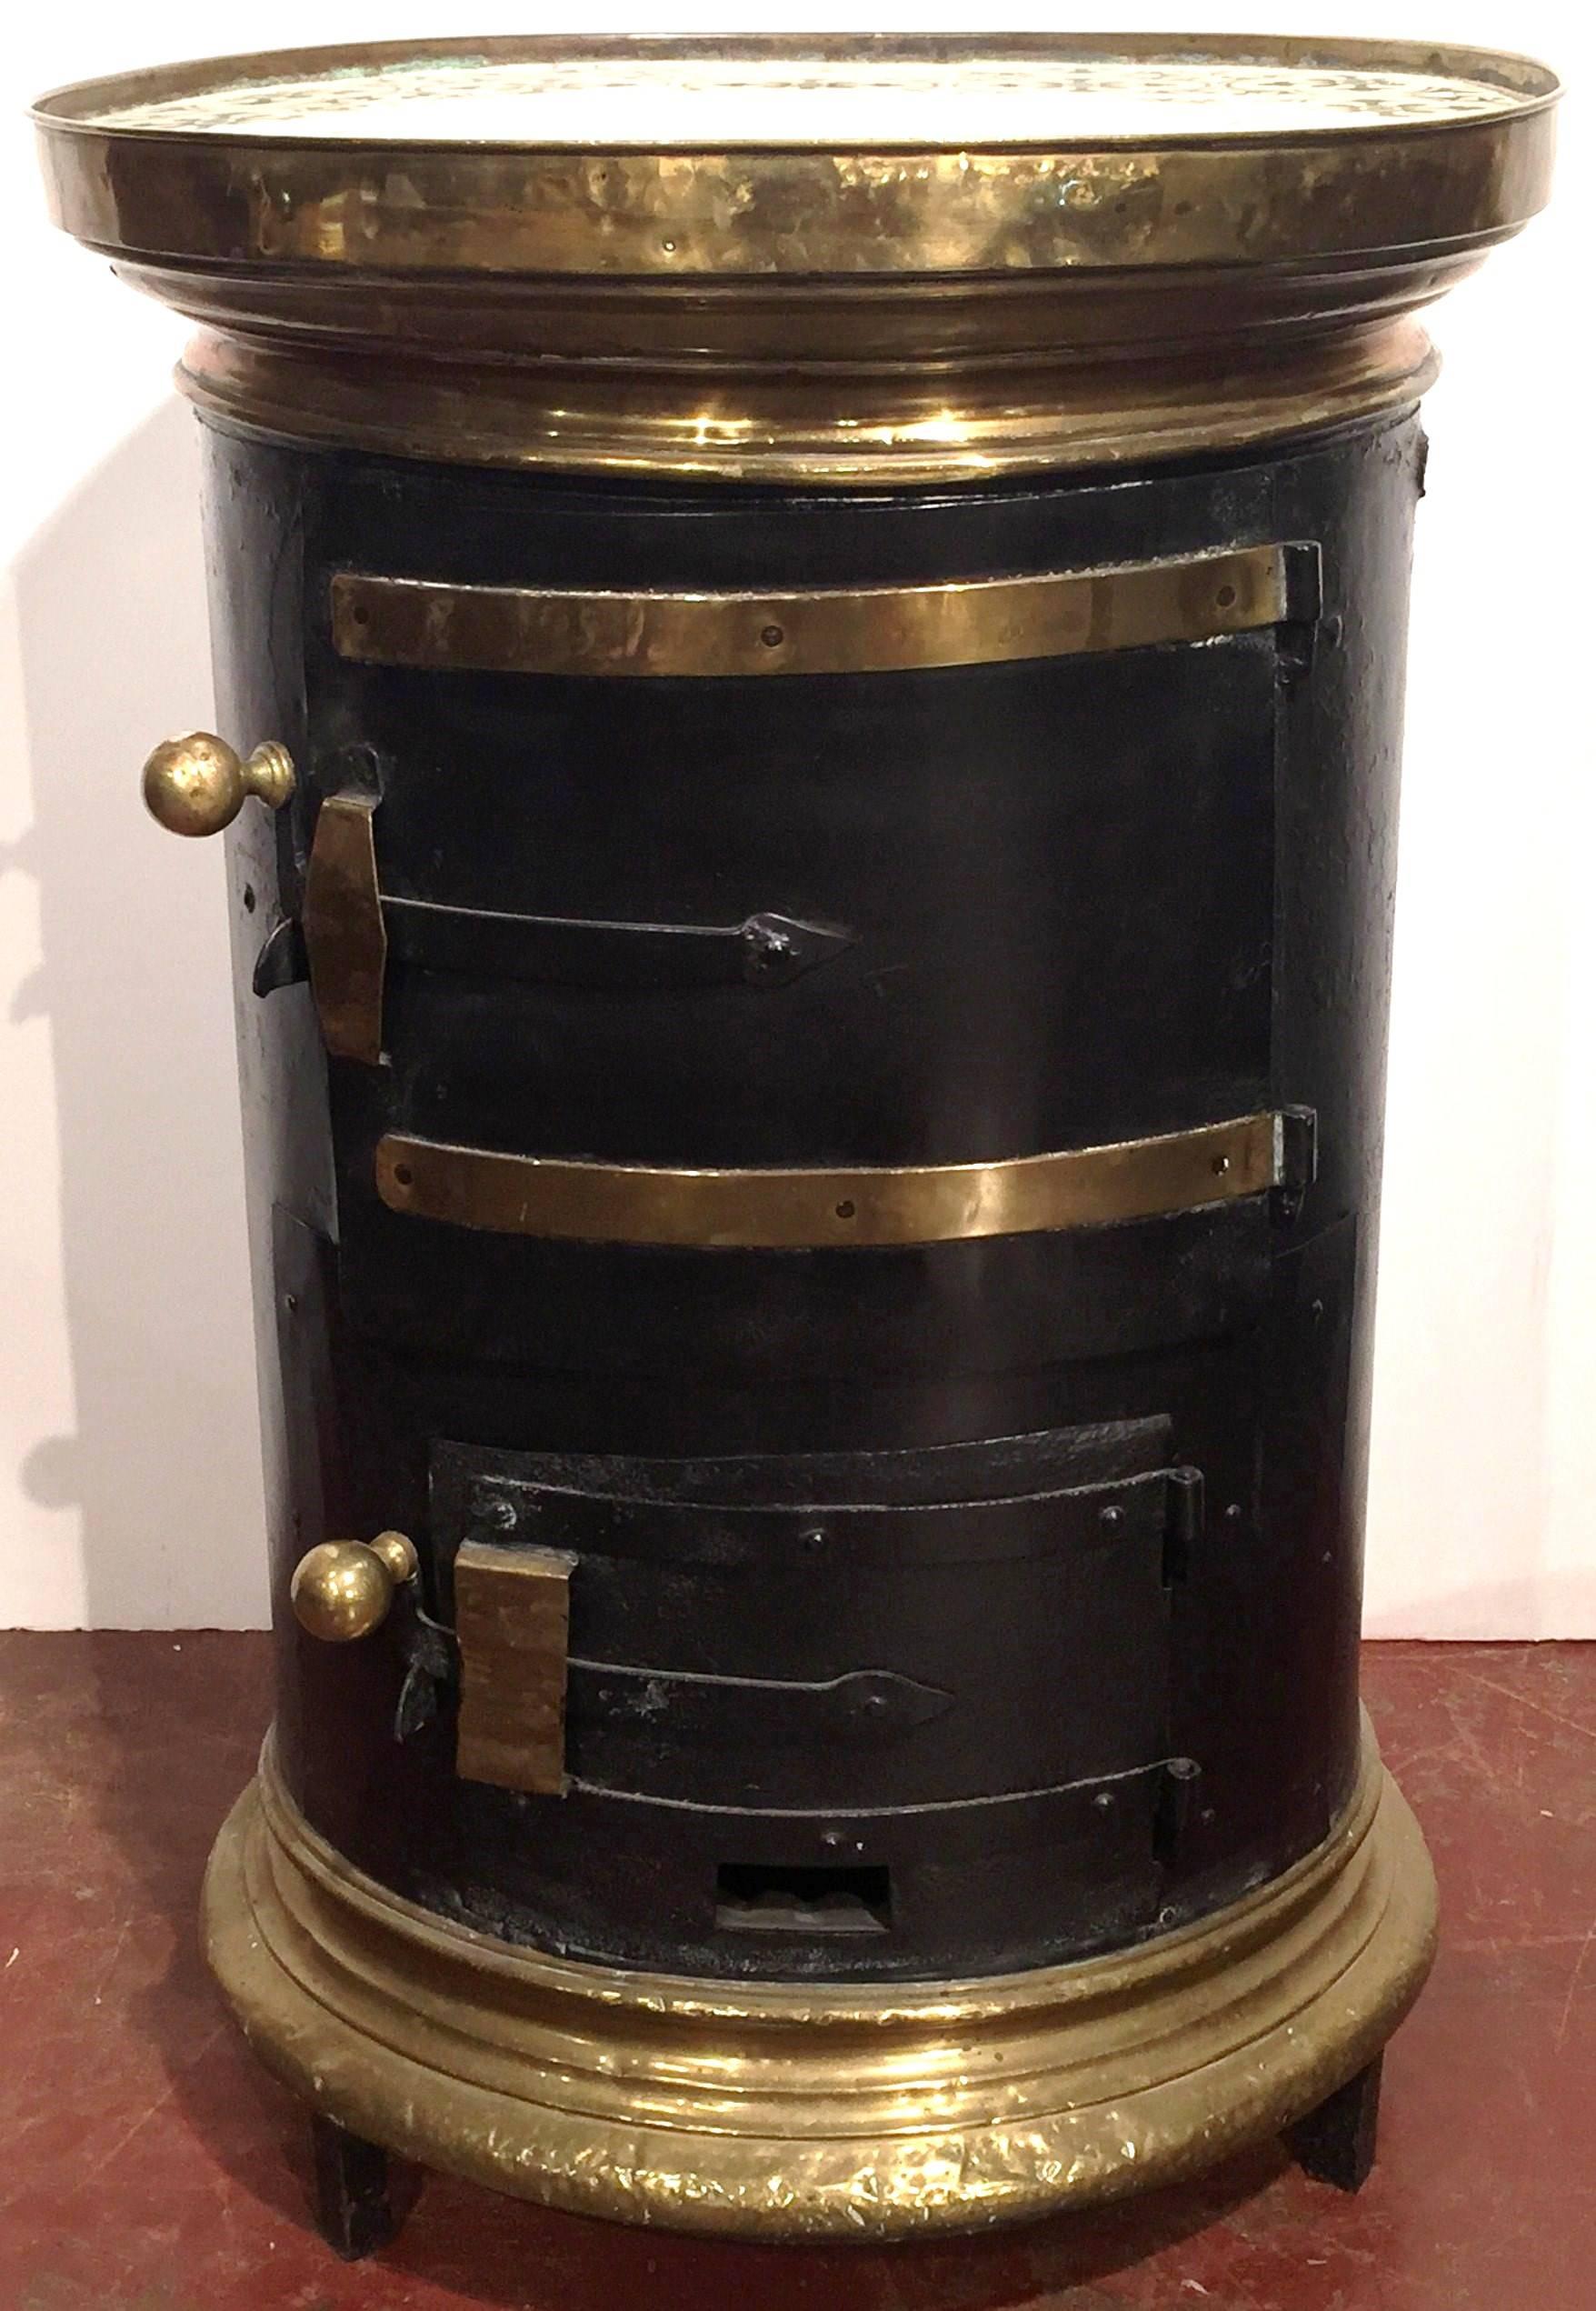 This interesting iron and brass heater was created in Versailles, France, circa 1870. The antique, circular warmer features copper rings at base, two doors with brass knobs and a brass ring at the top embellished by hand painted tiles on the